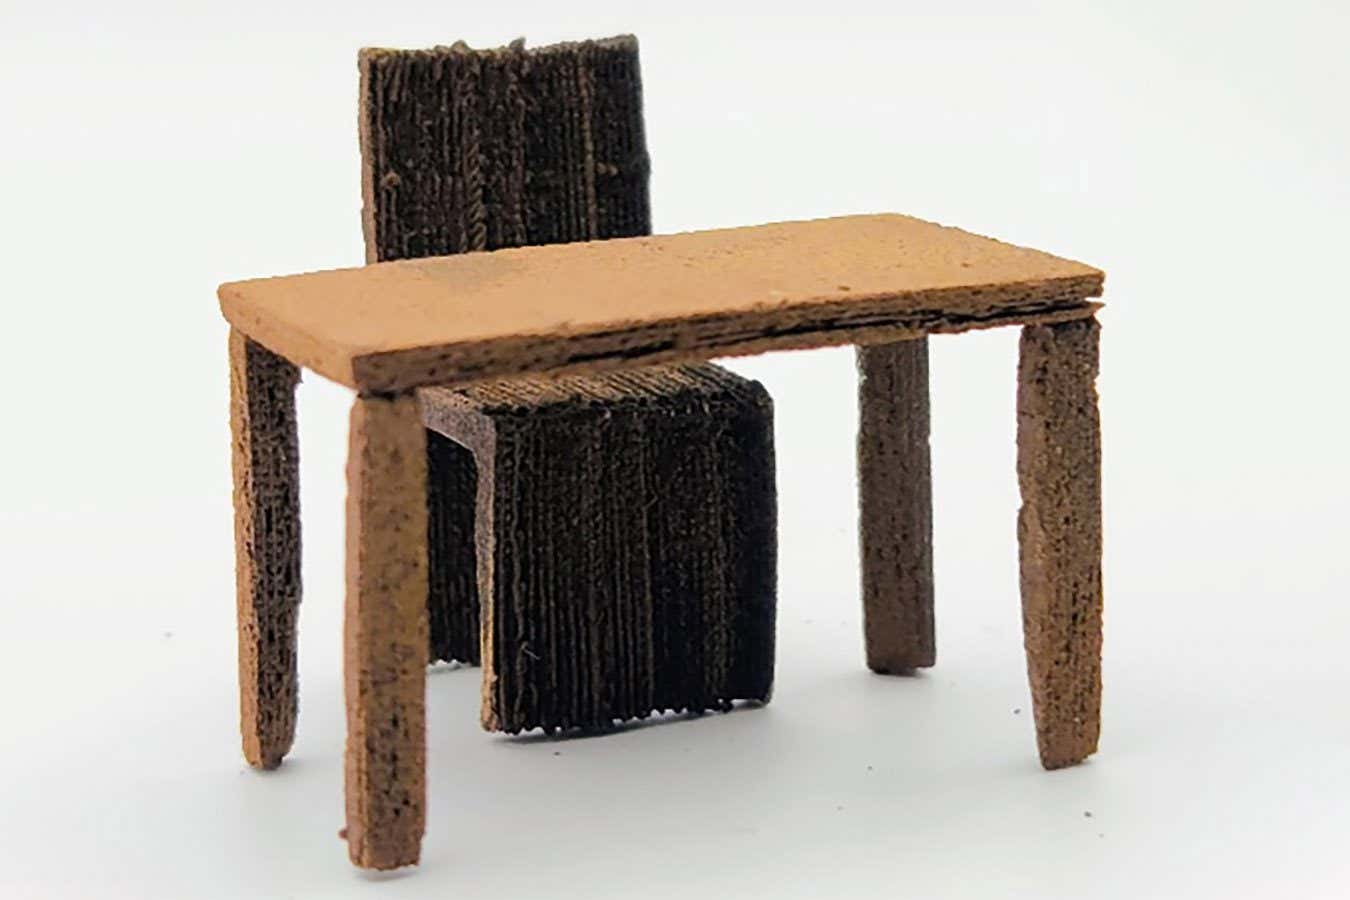 Miniature furniture 3D printed using ink made from recycled wood – The TechLead